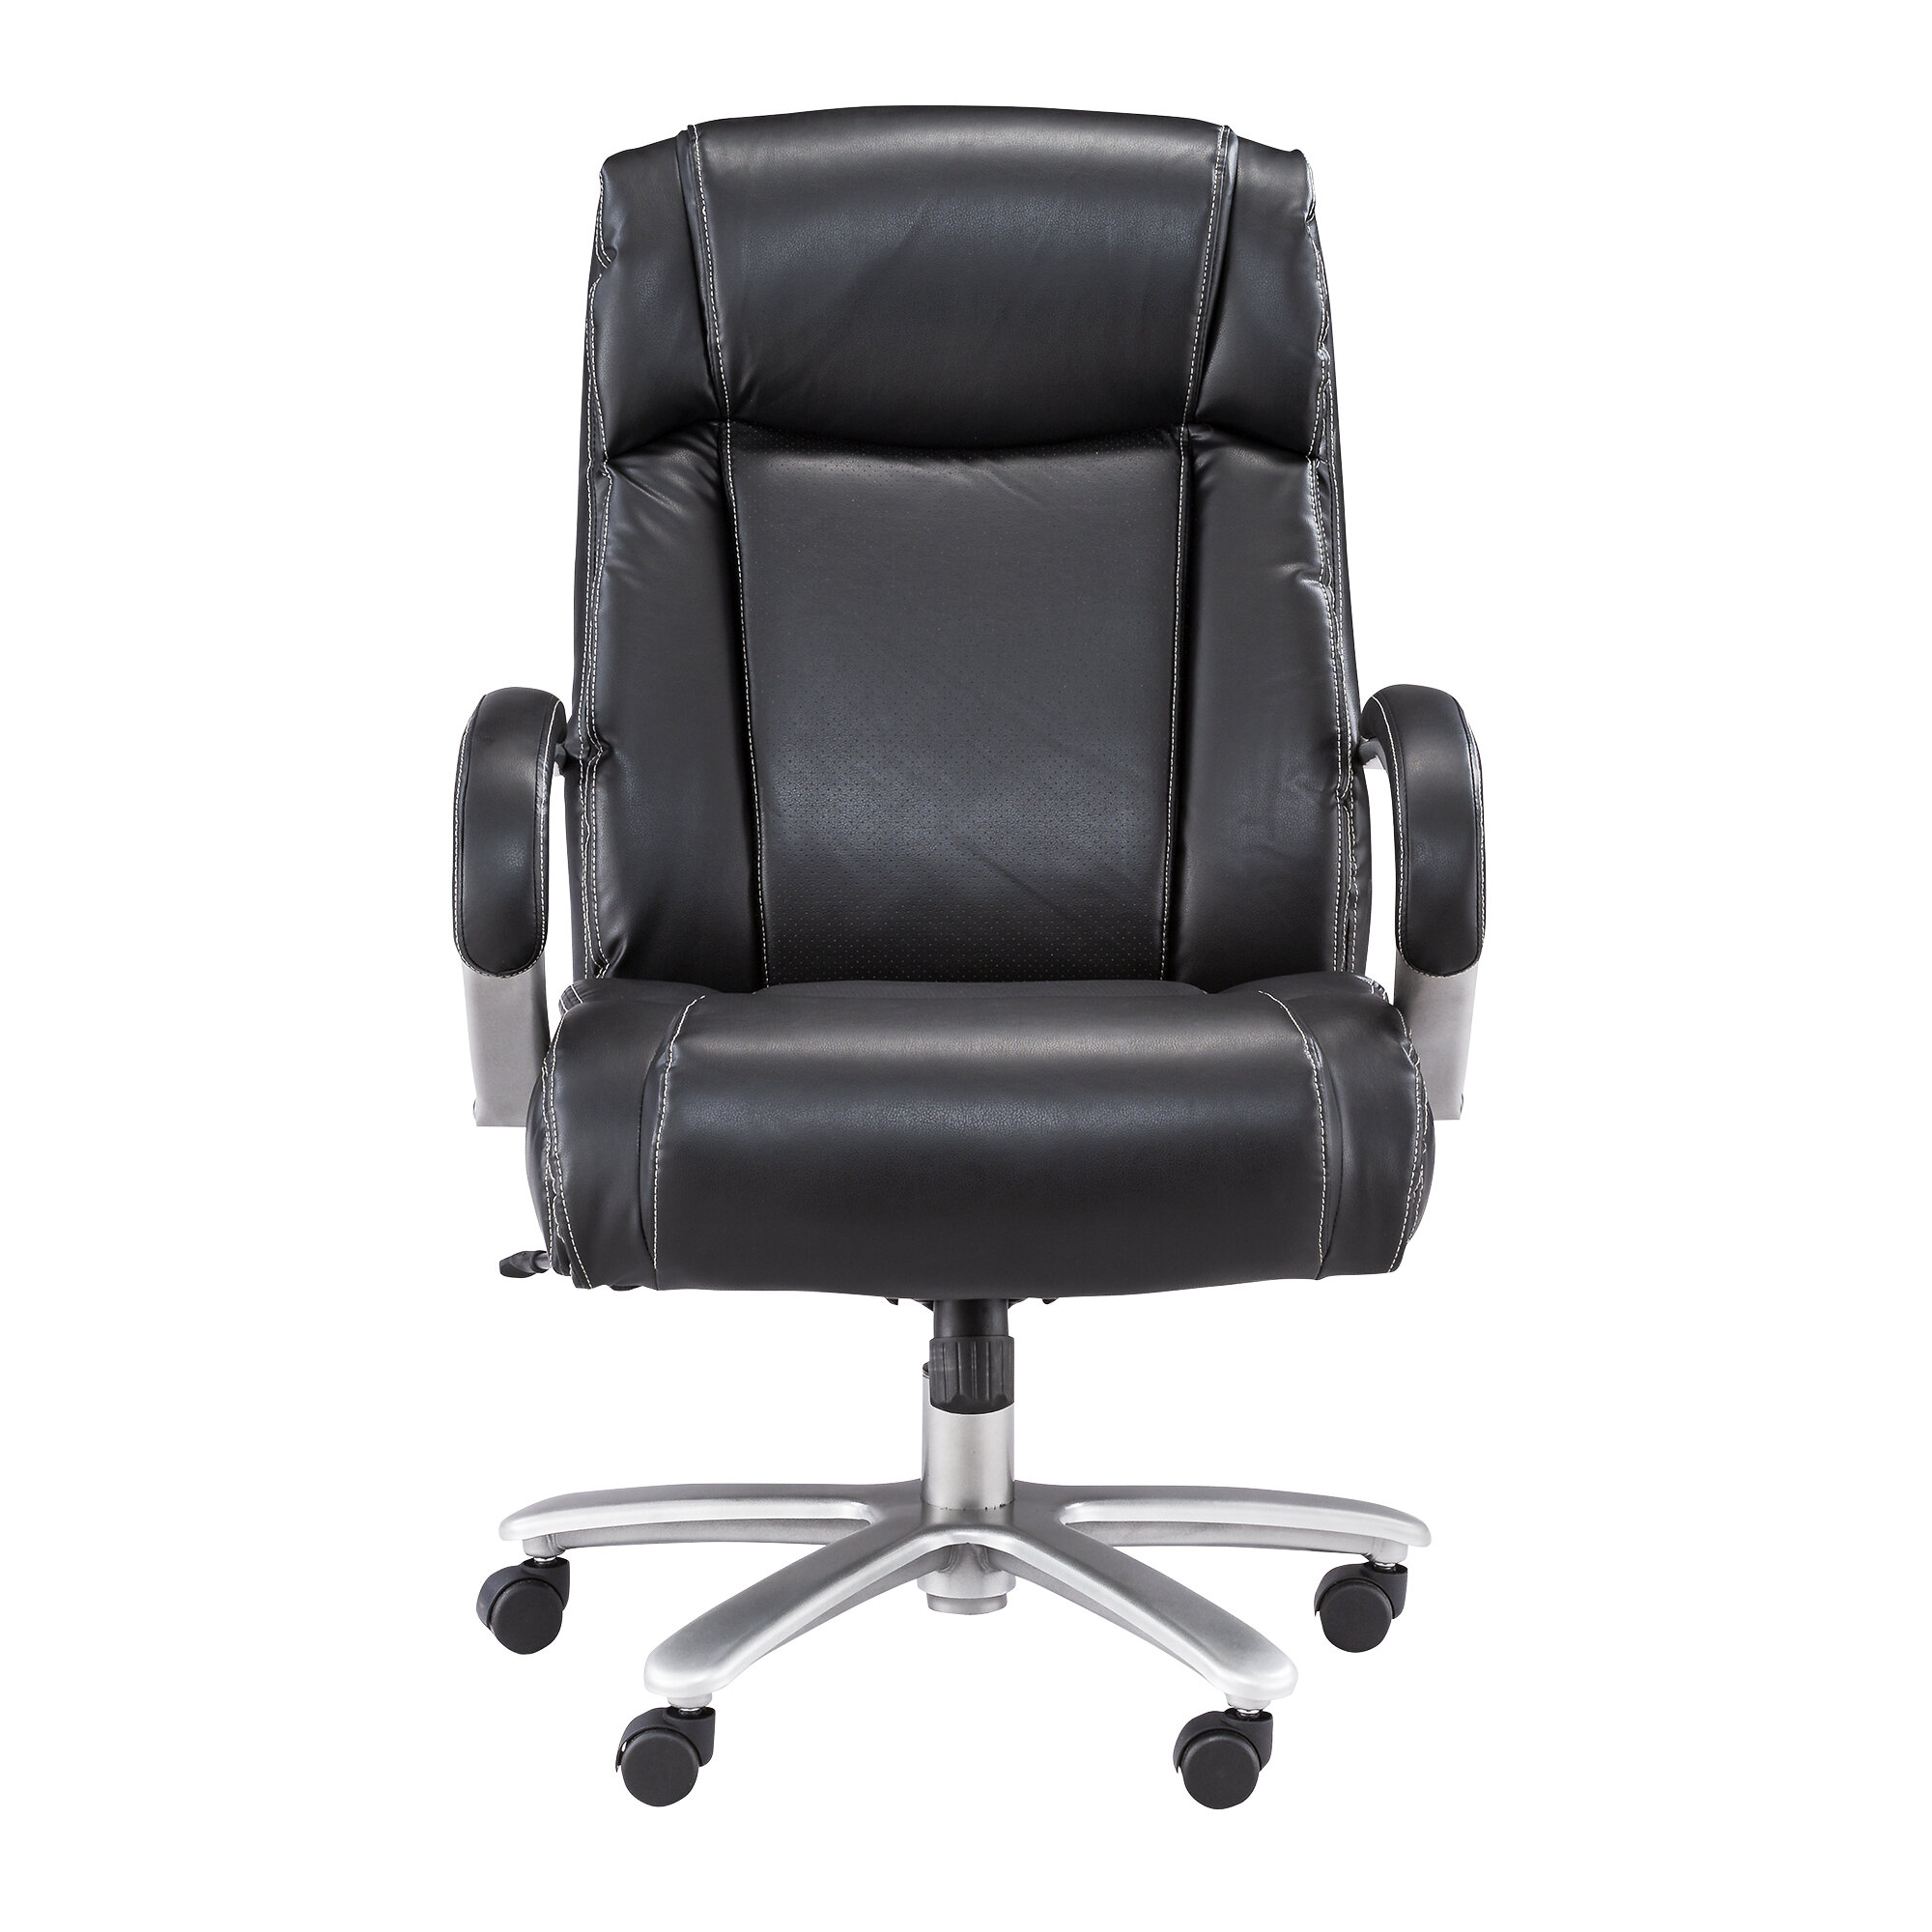 Inbox Zero Hristos Home Office Chair, 400LBS Big and Tall Heavy